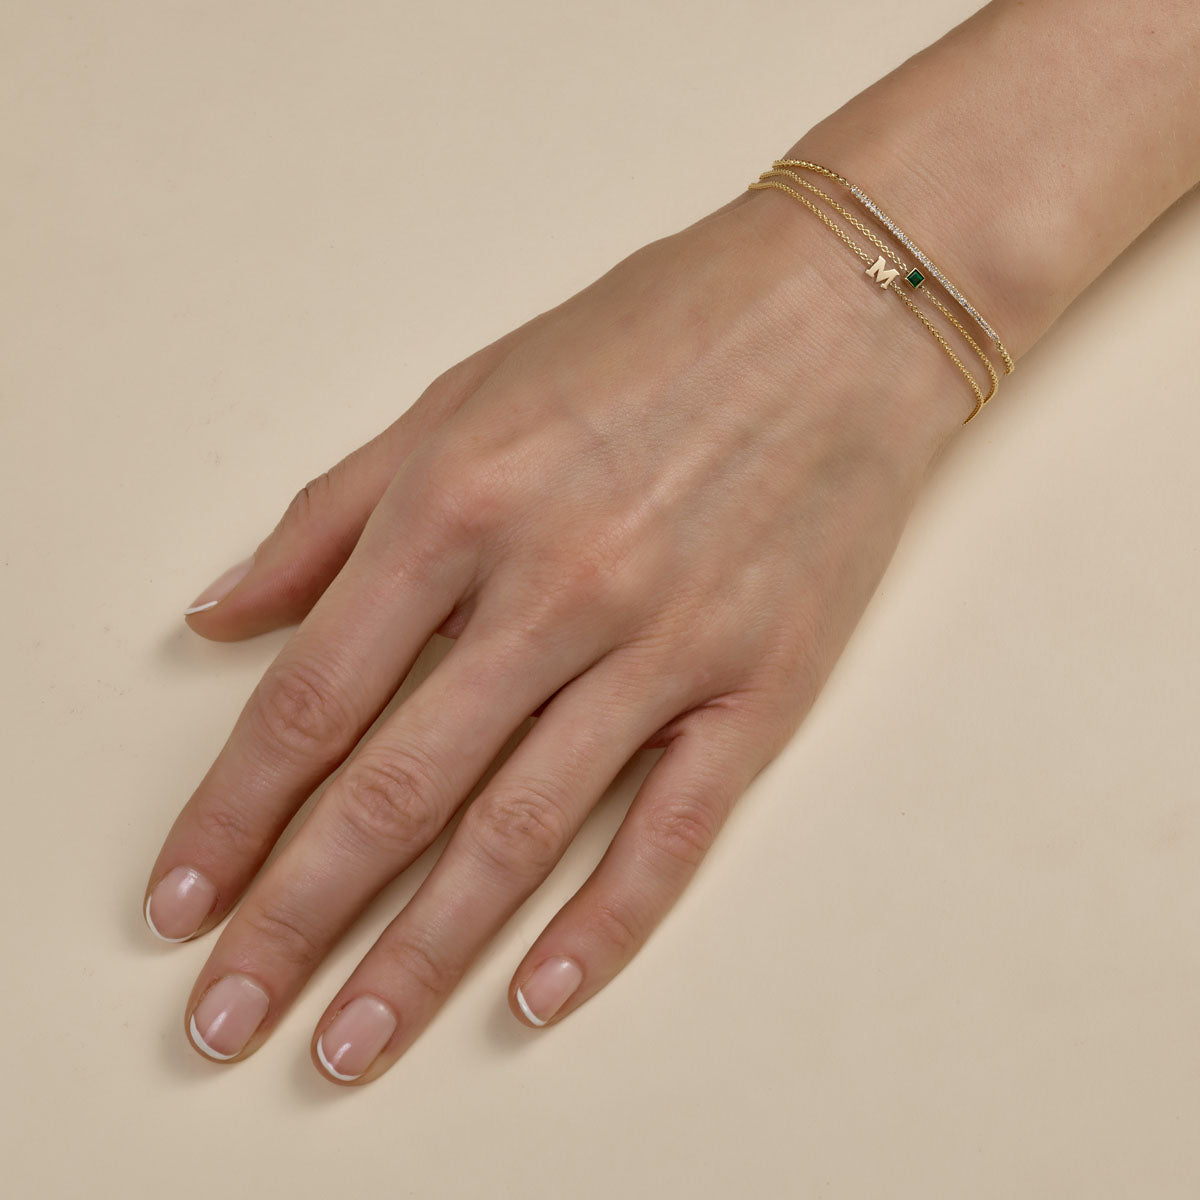 multiple gold diamond and initial bracelets stacked on womans hand